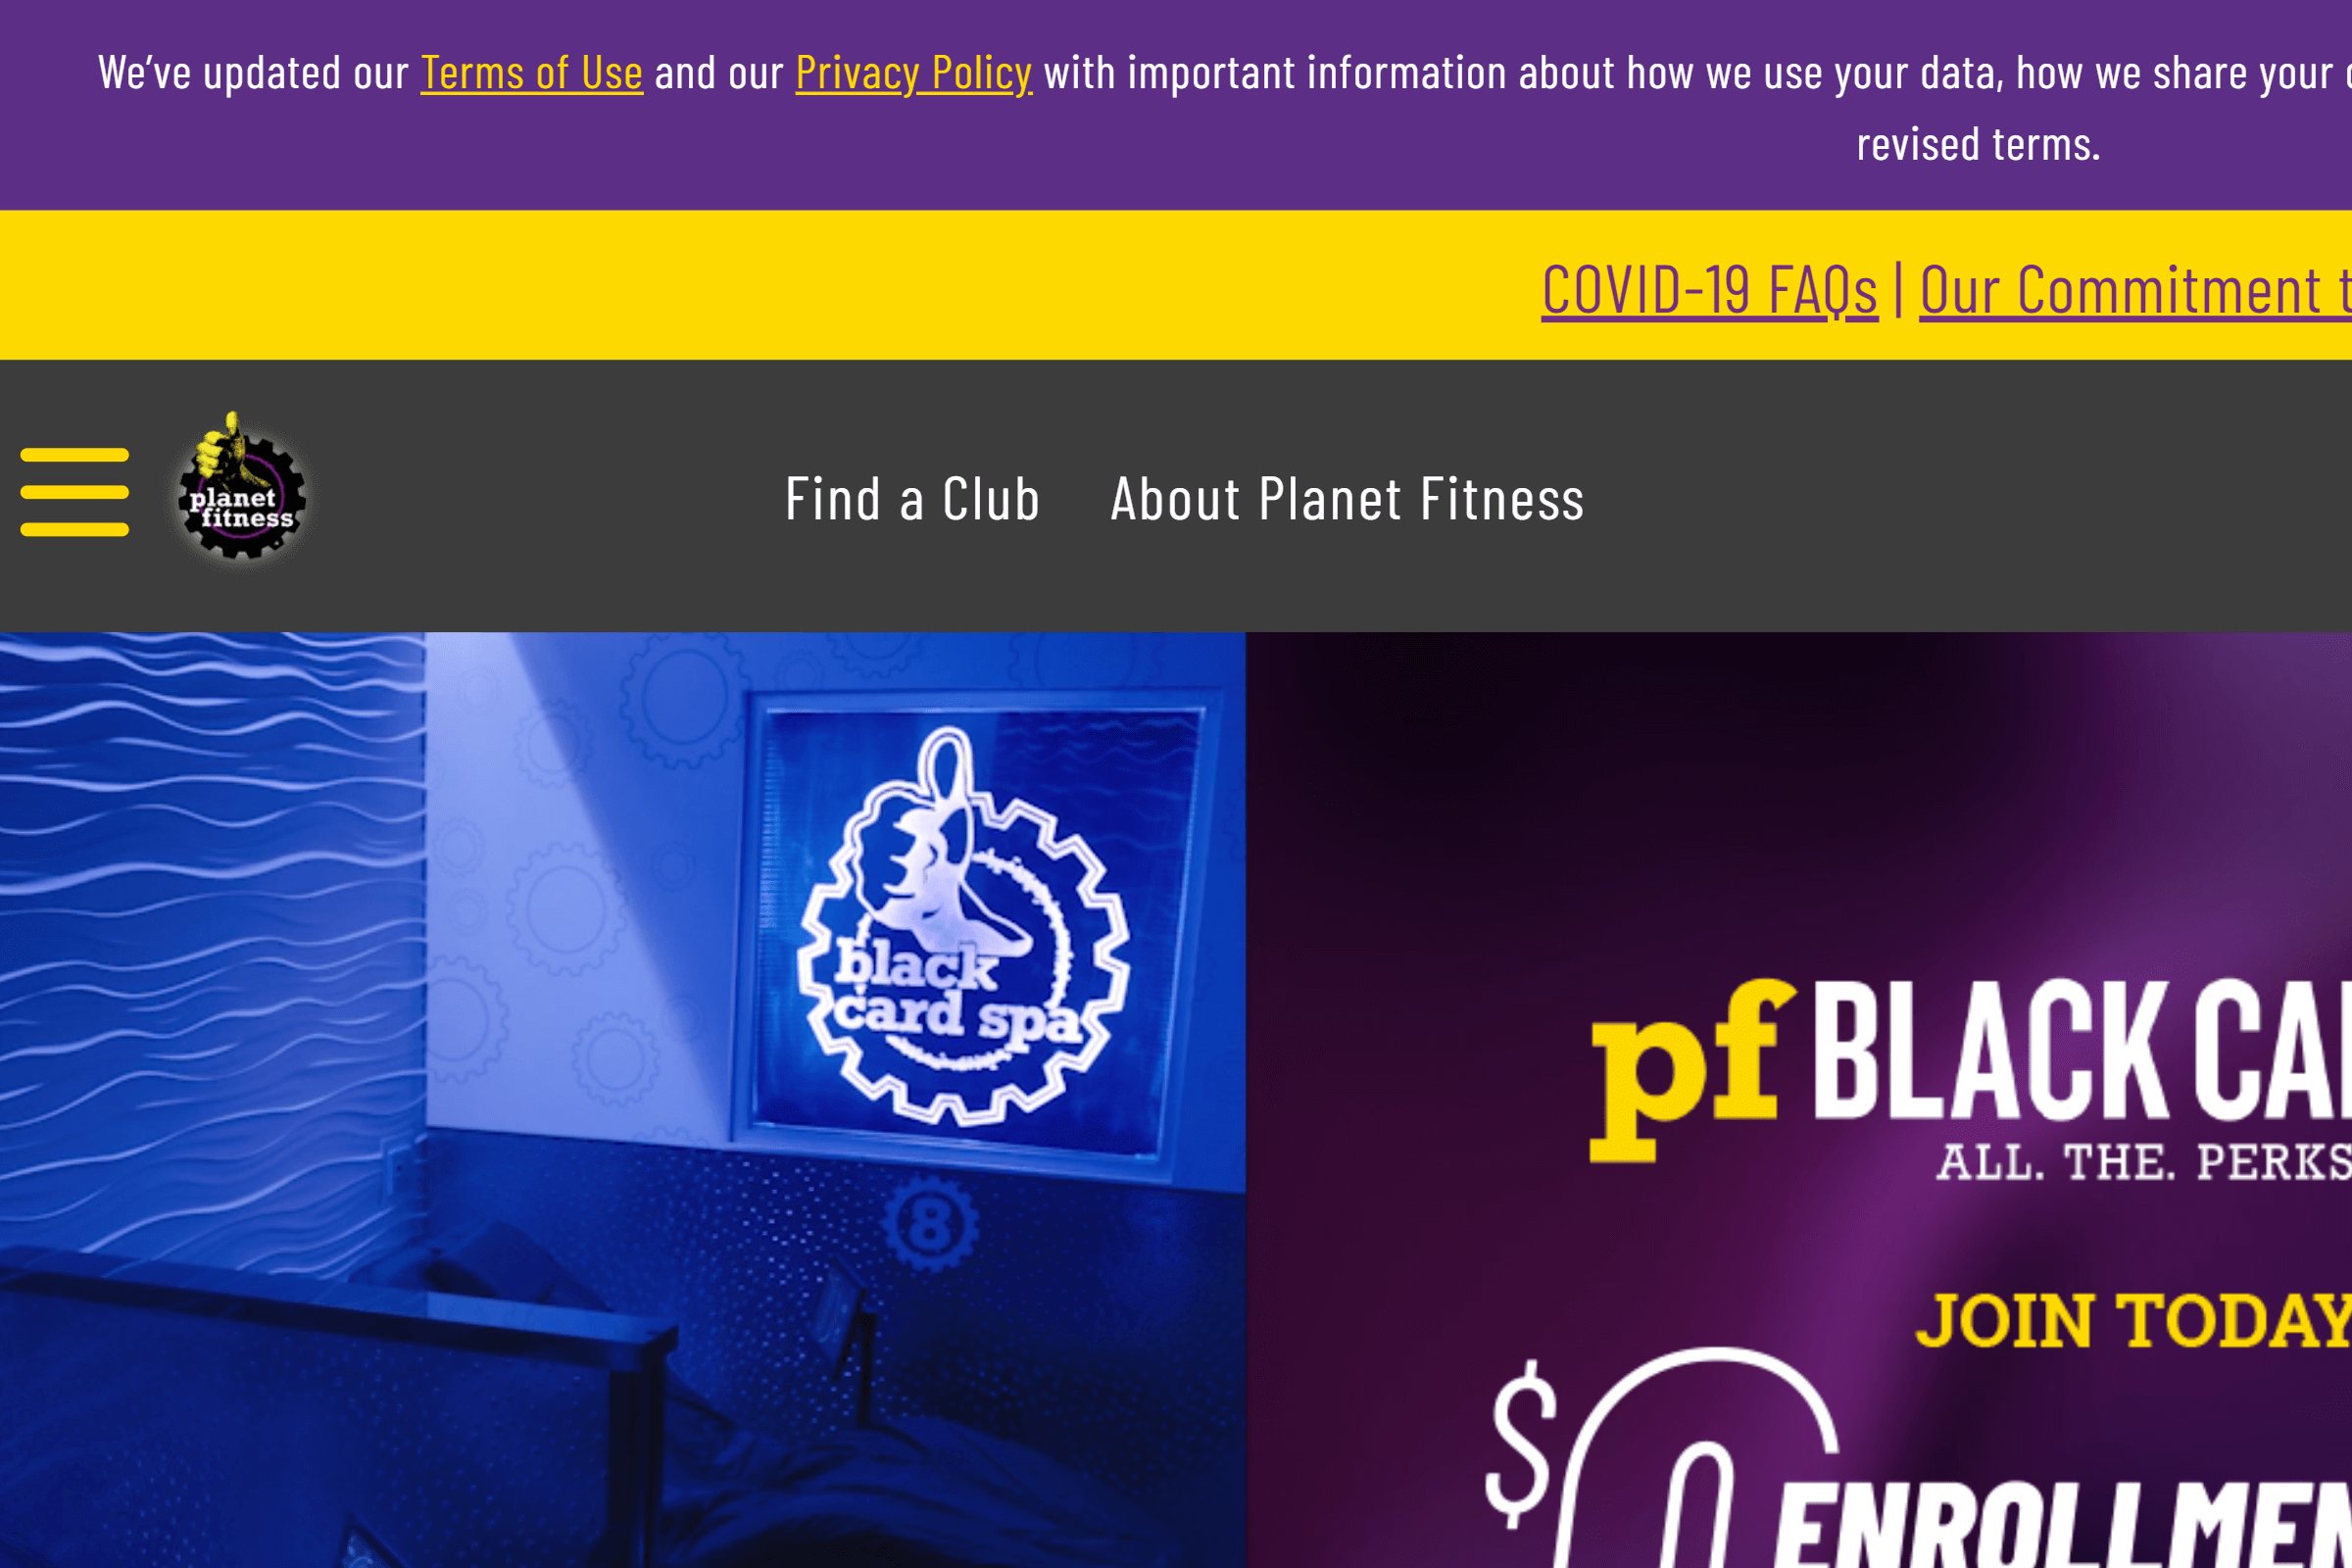 Planet Fitness on ReadSomeReviews